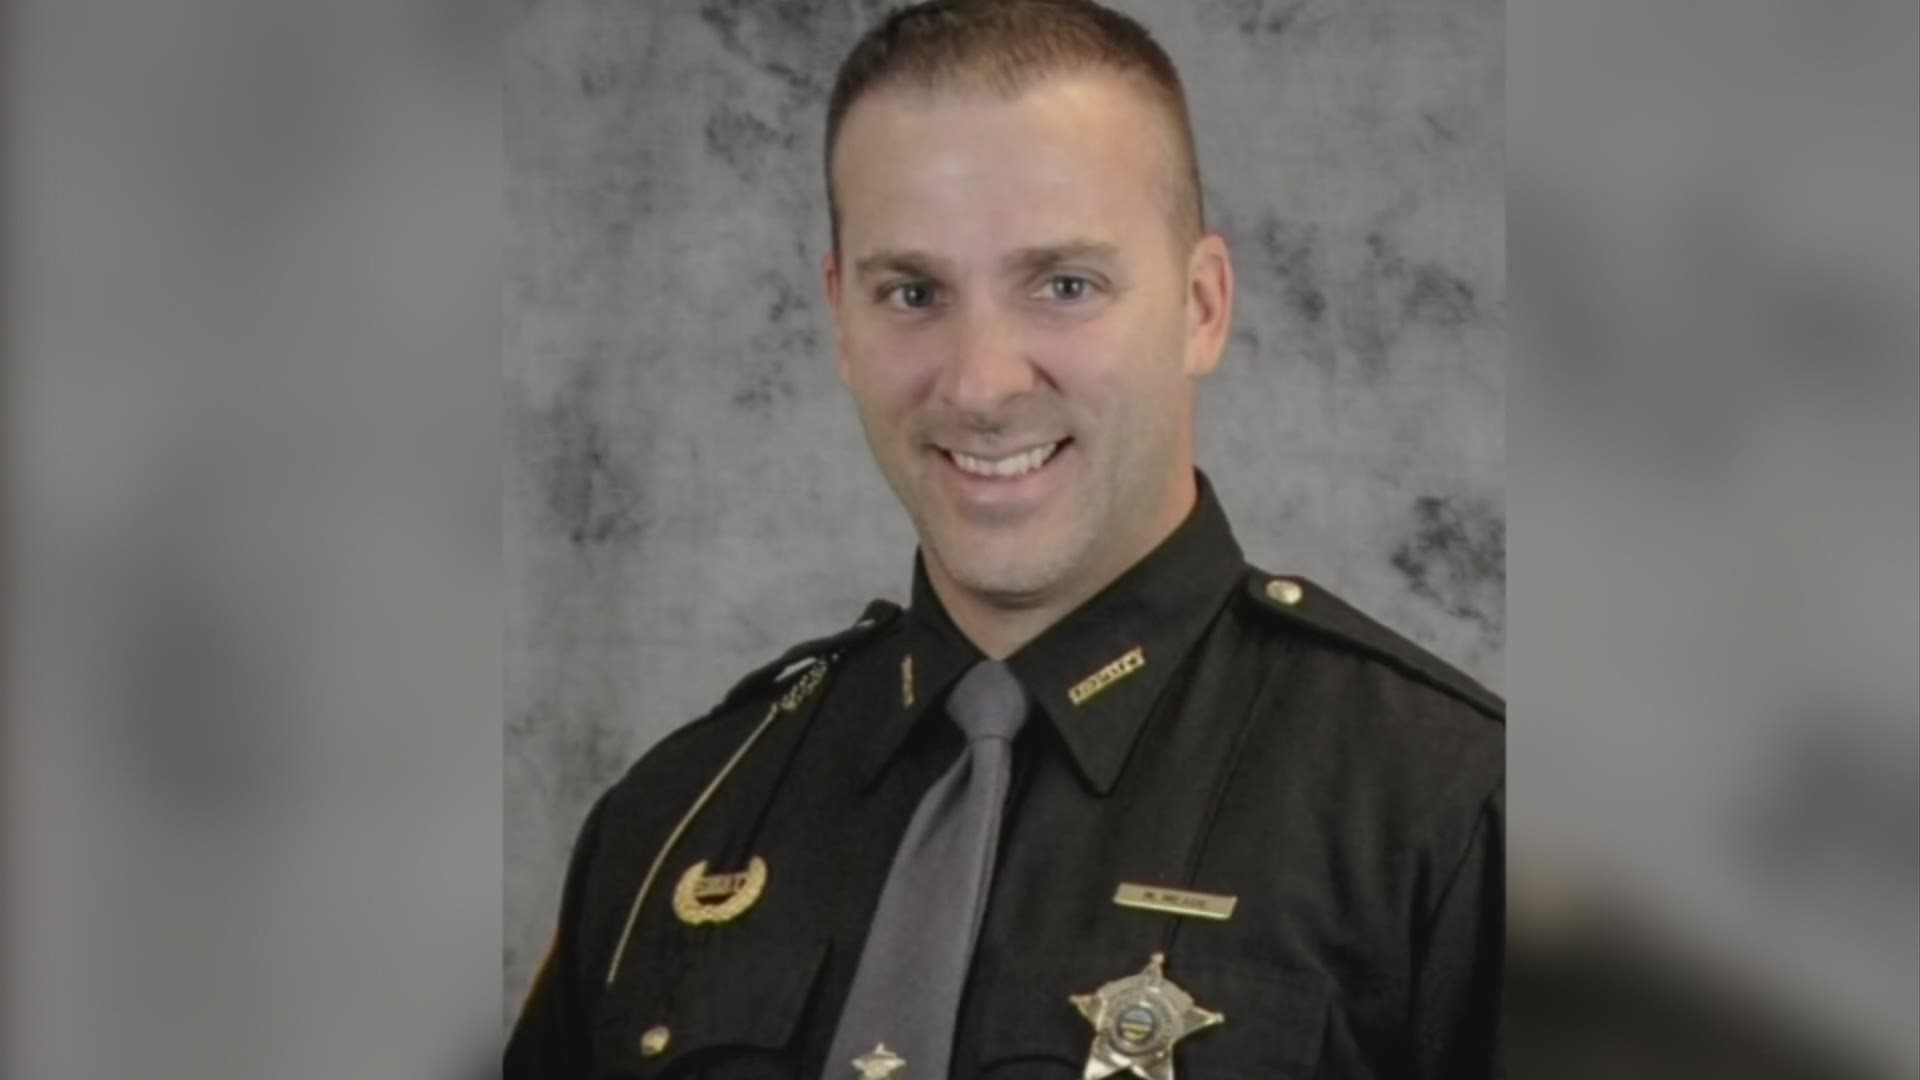 The sheriff's office said Deputy Jason Meade's retirement takes effect on July 2.